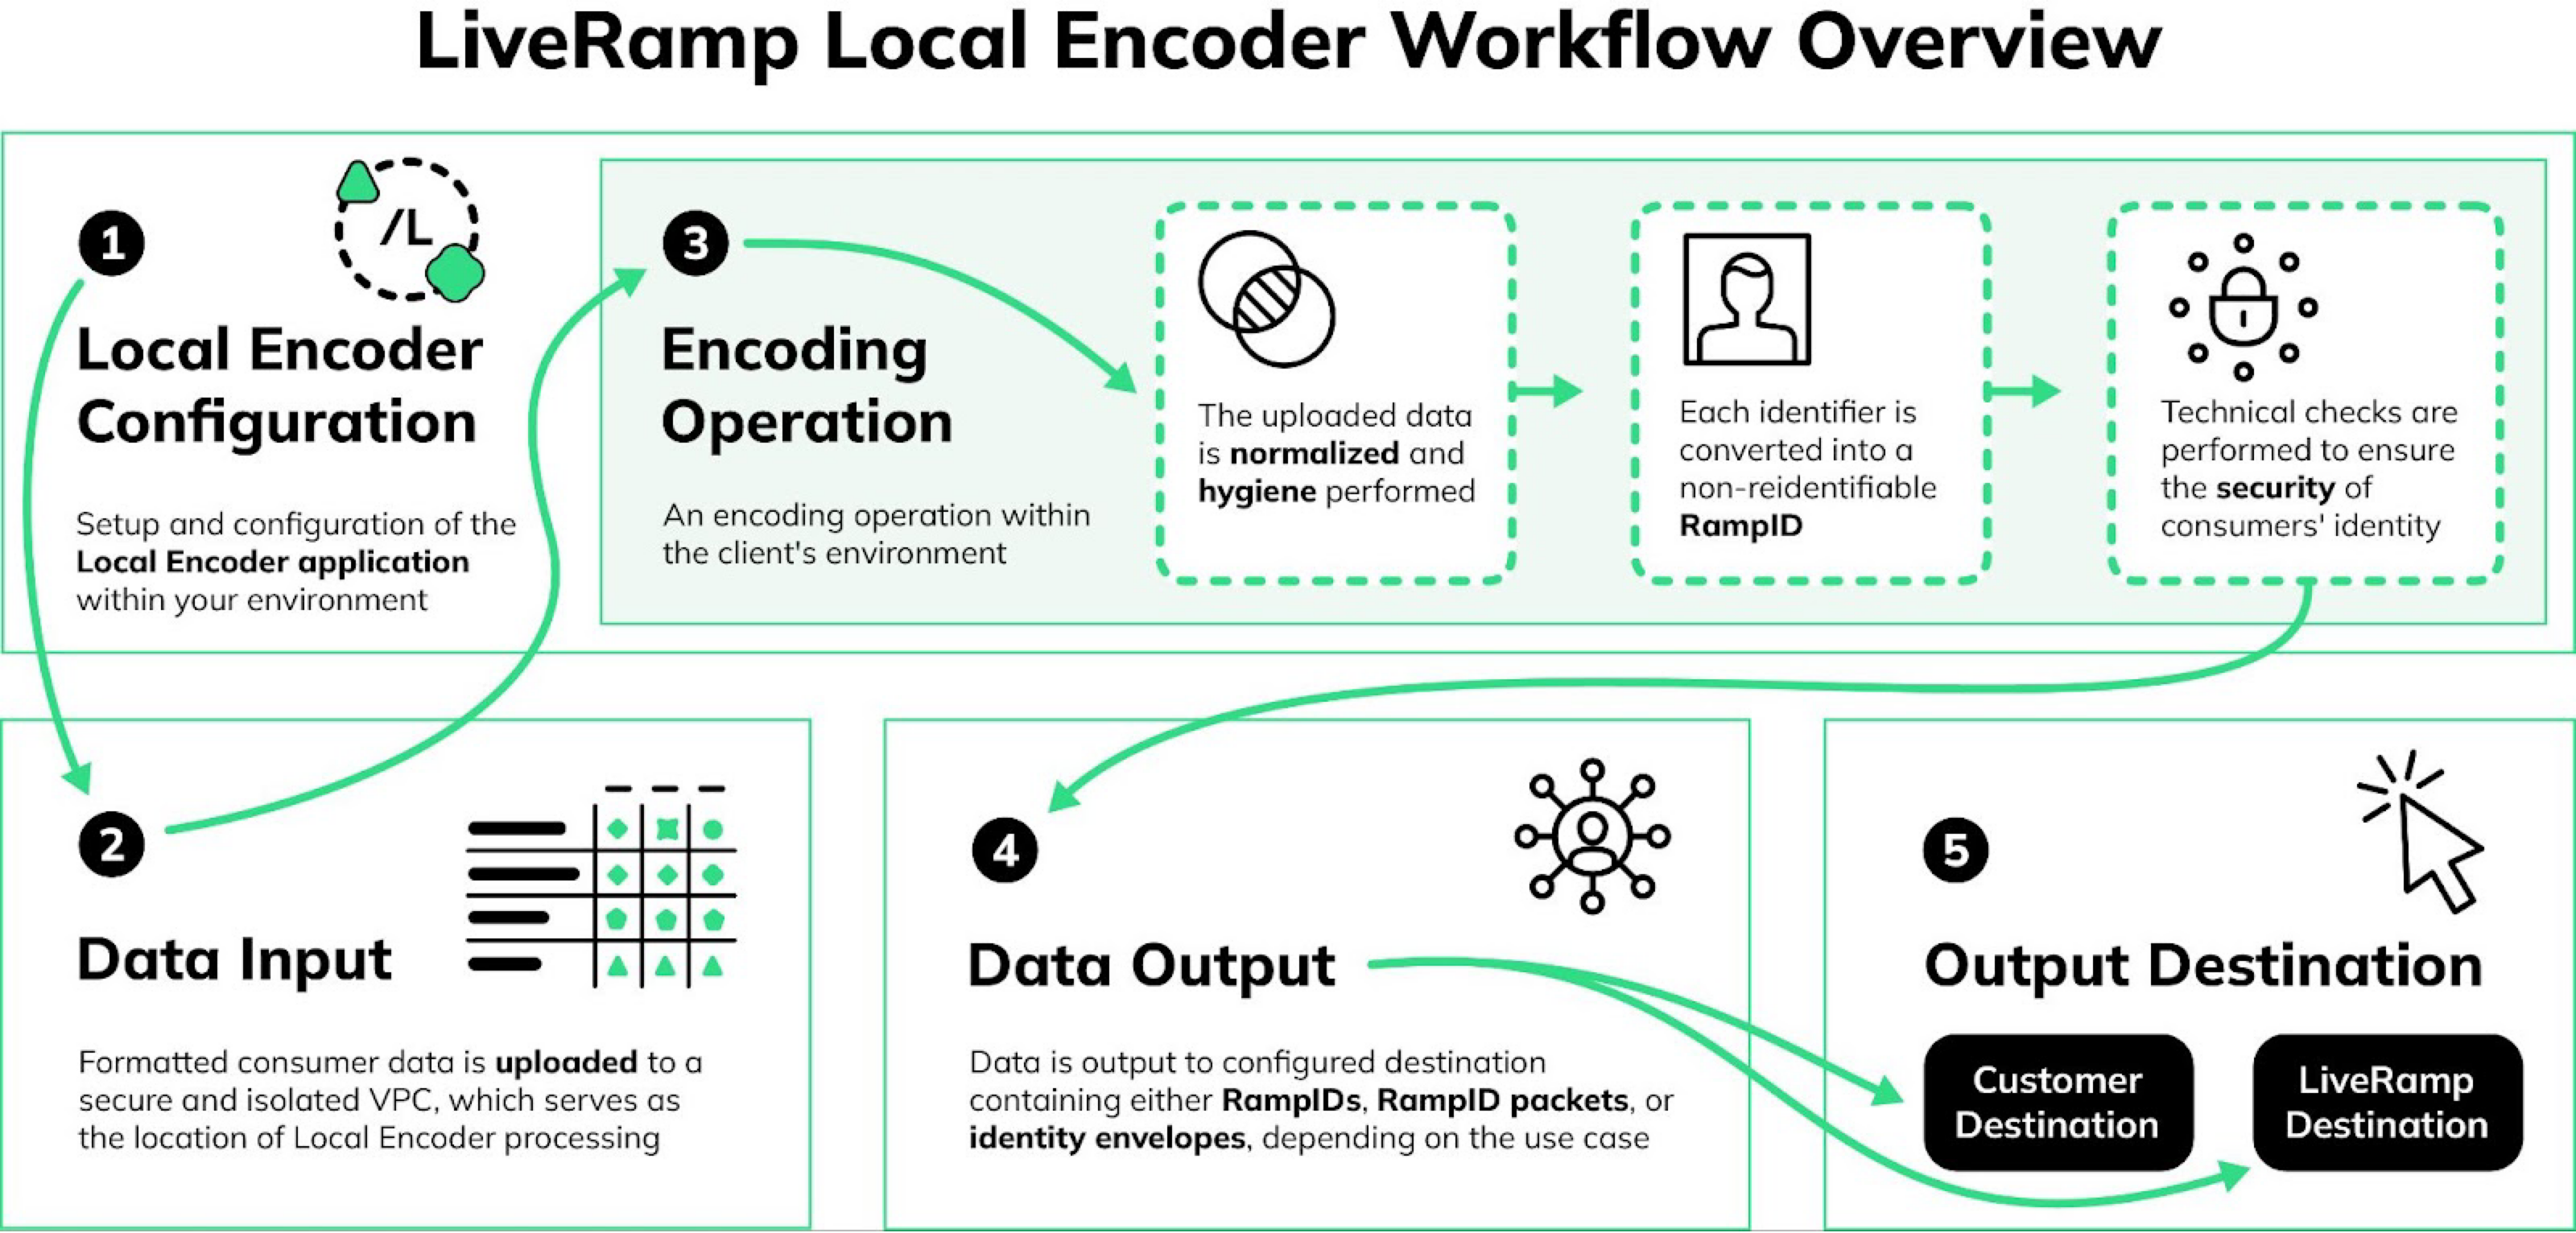 I-Local_Encoder-Local_Encoder_workflow.png